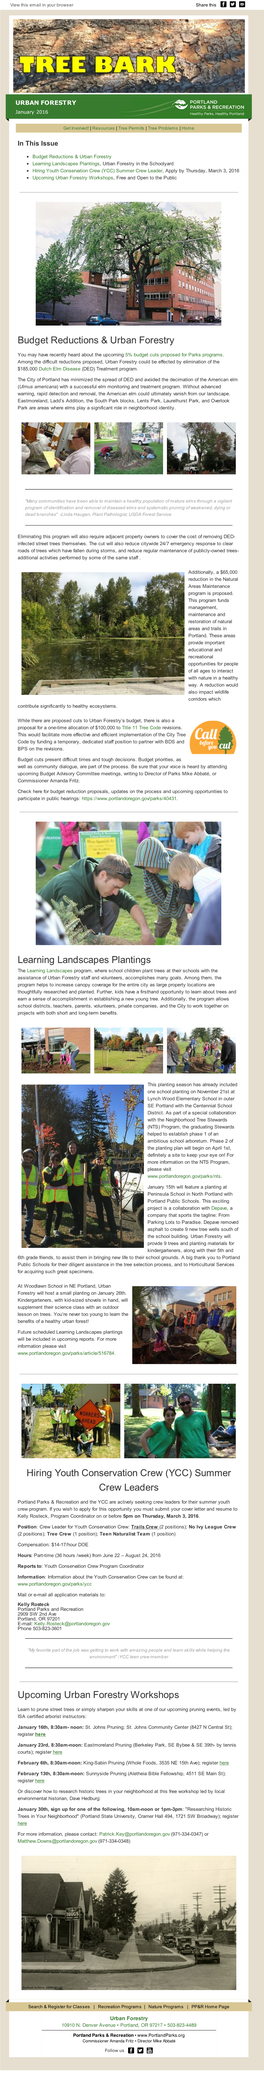 Budget Reductions & Urban Forestry Learning Landscapes Plantings